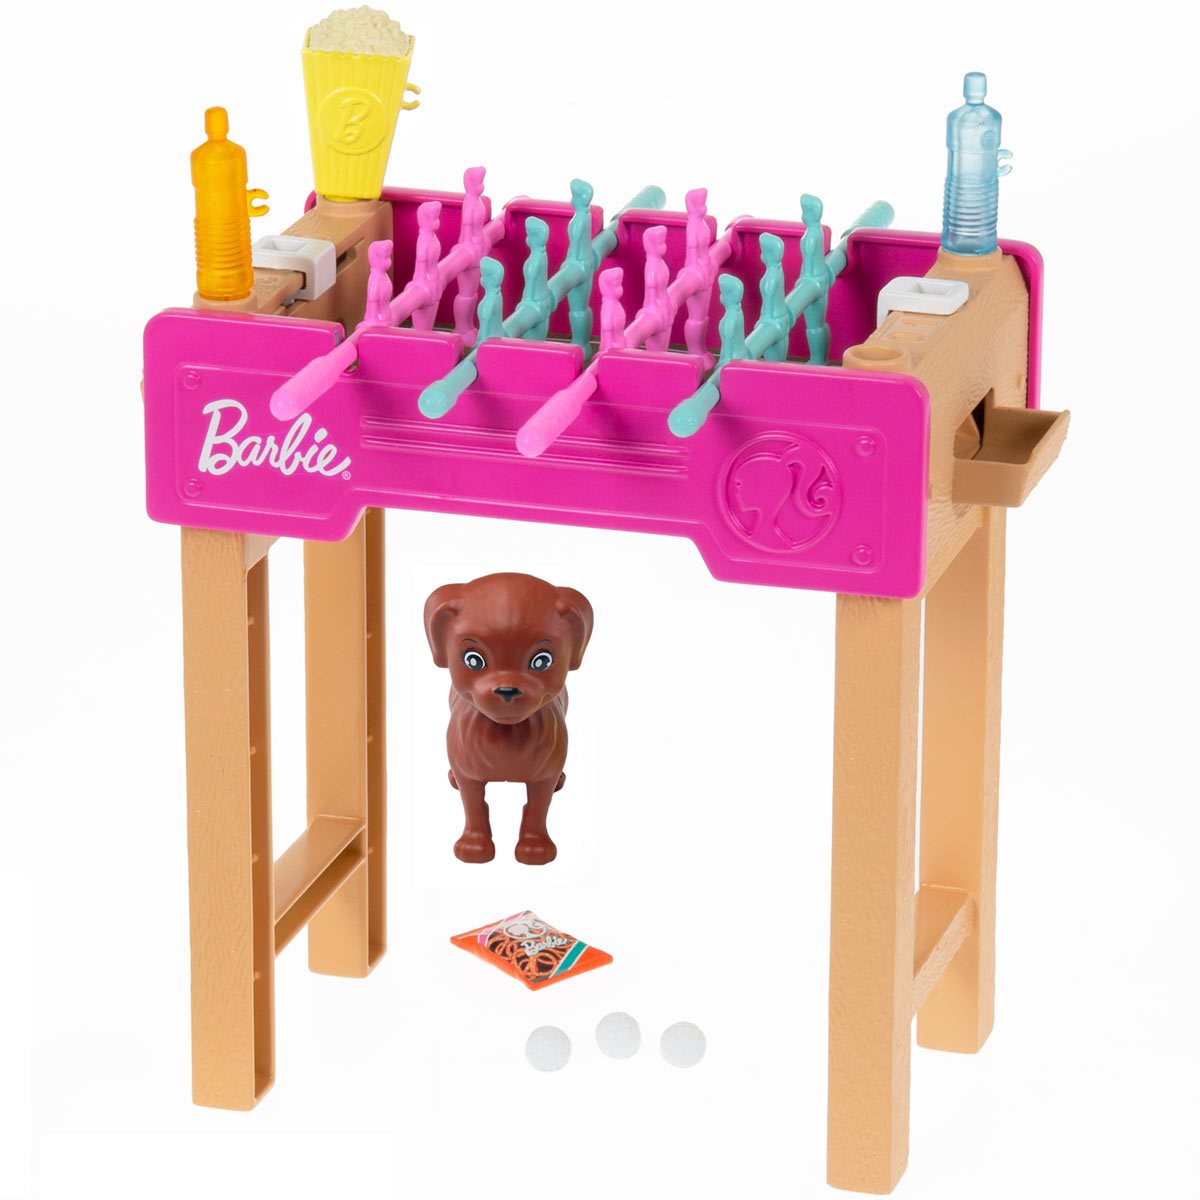 Details about   WOW BARBIE DOLL FOOSBALL GAME TABLE THAT ACTUAL WORKS FOR DOLL BRAND NEW AMAZING